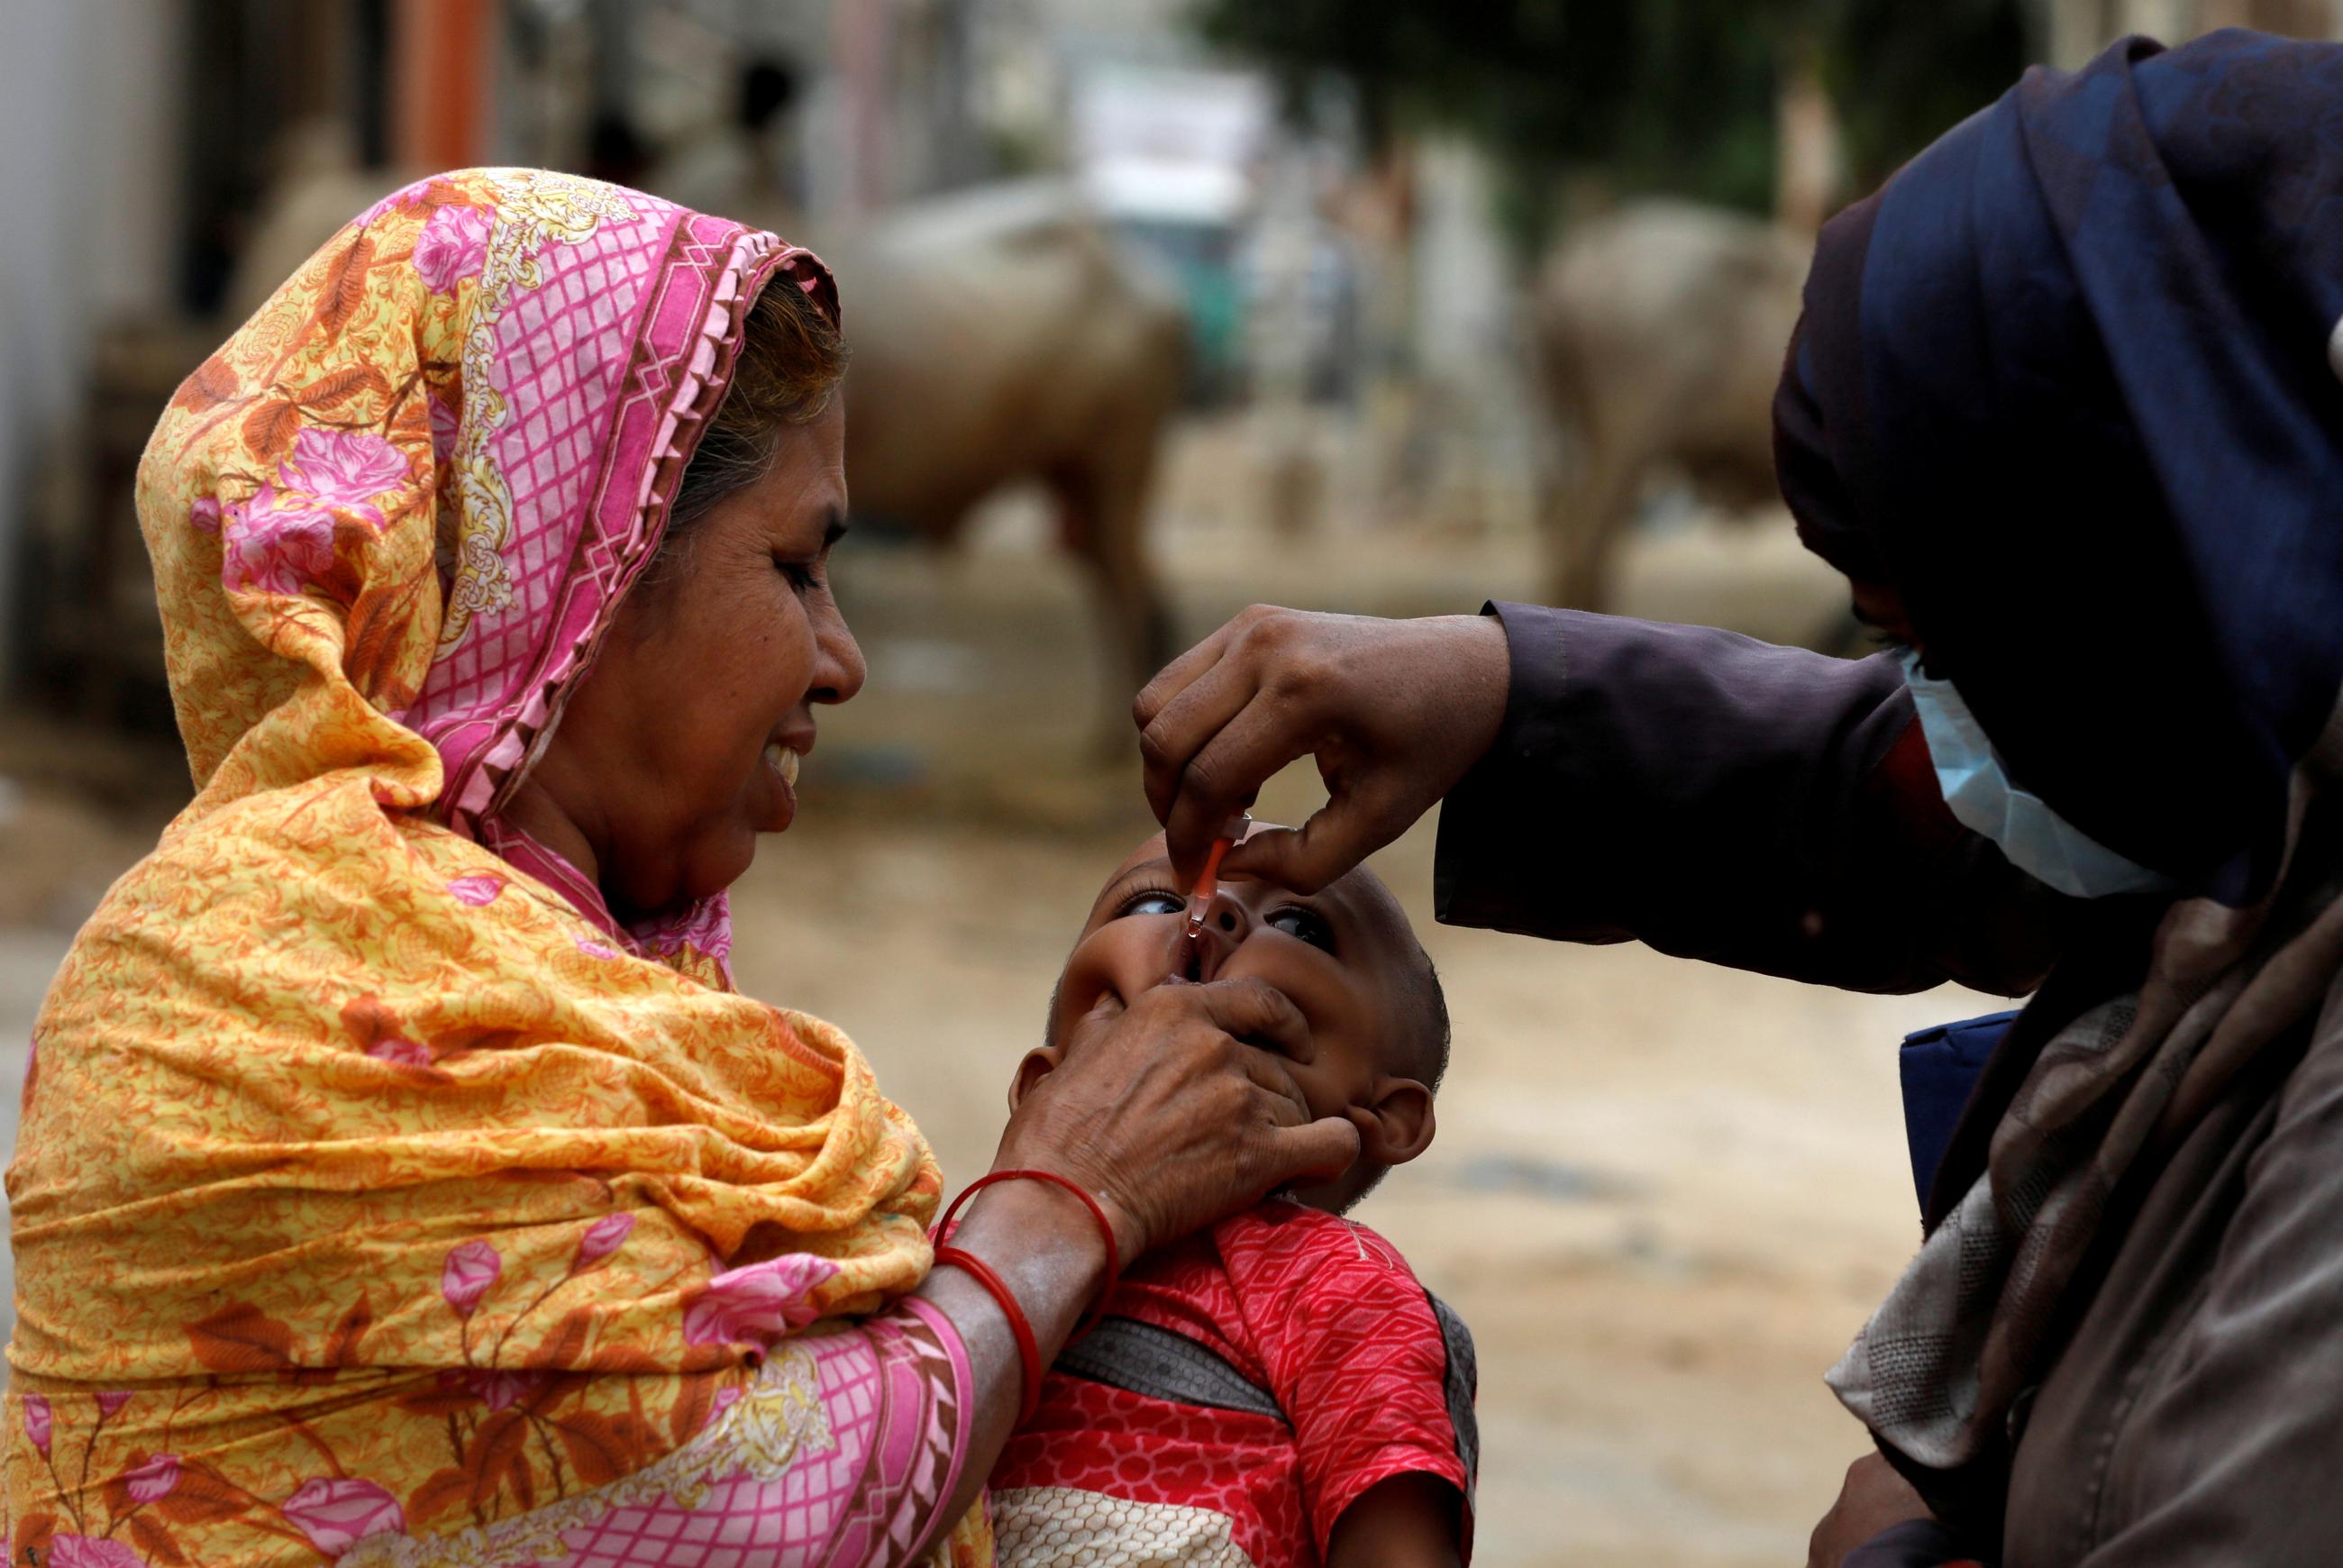 A boy receives polio vaccine drops, during an anti-polio campaign, in a low-income neighborhood.